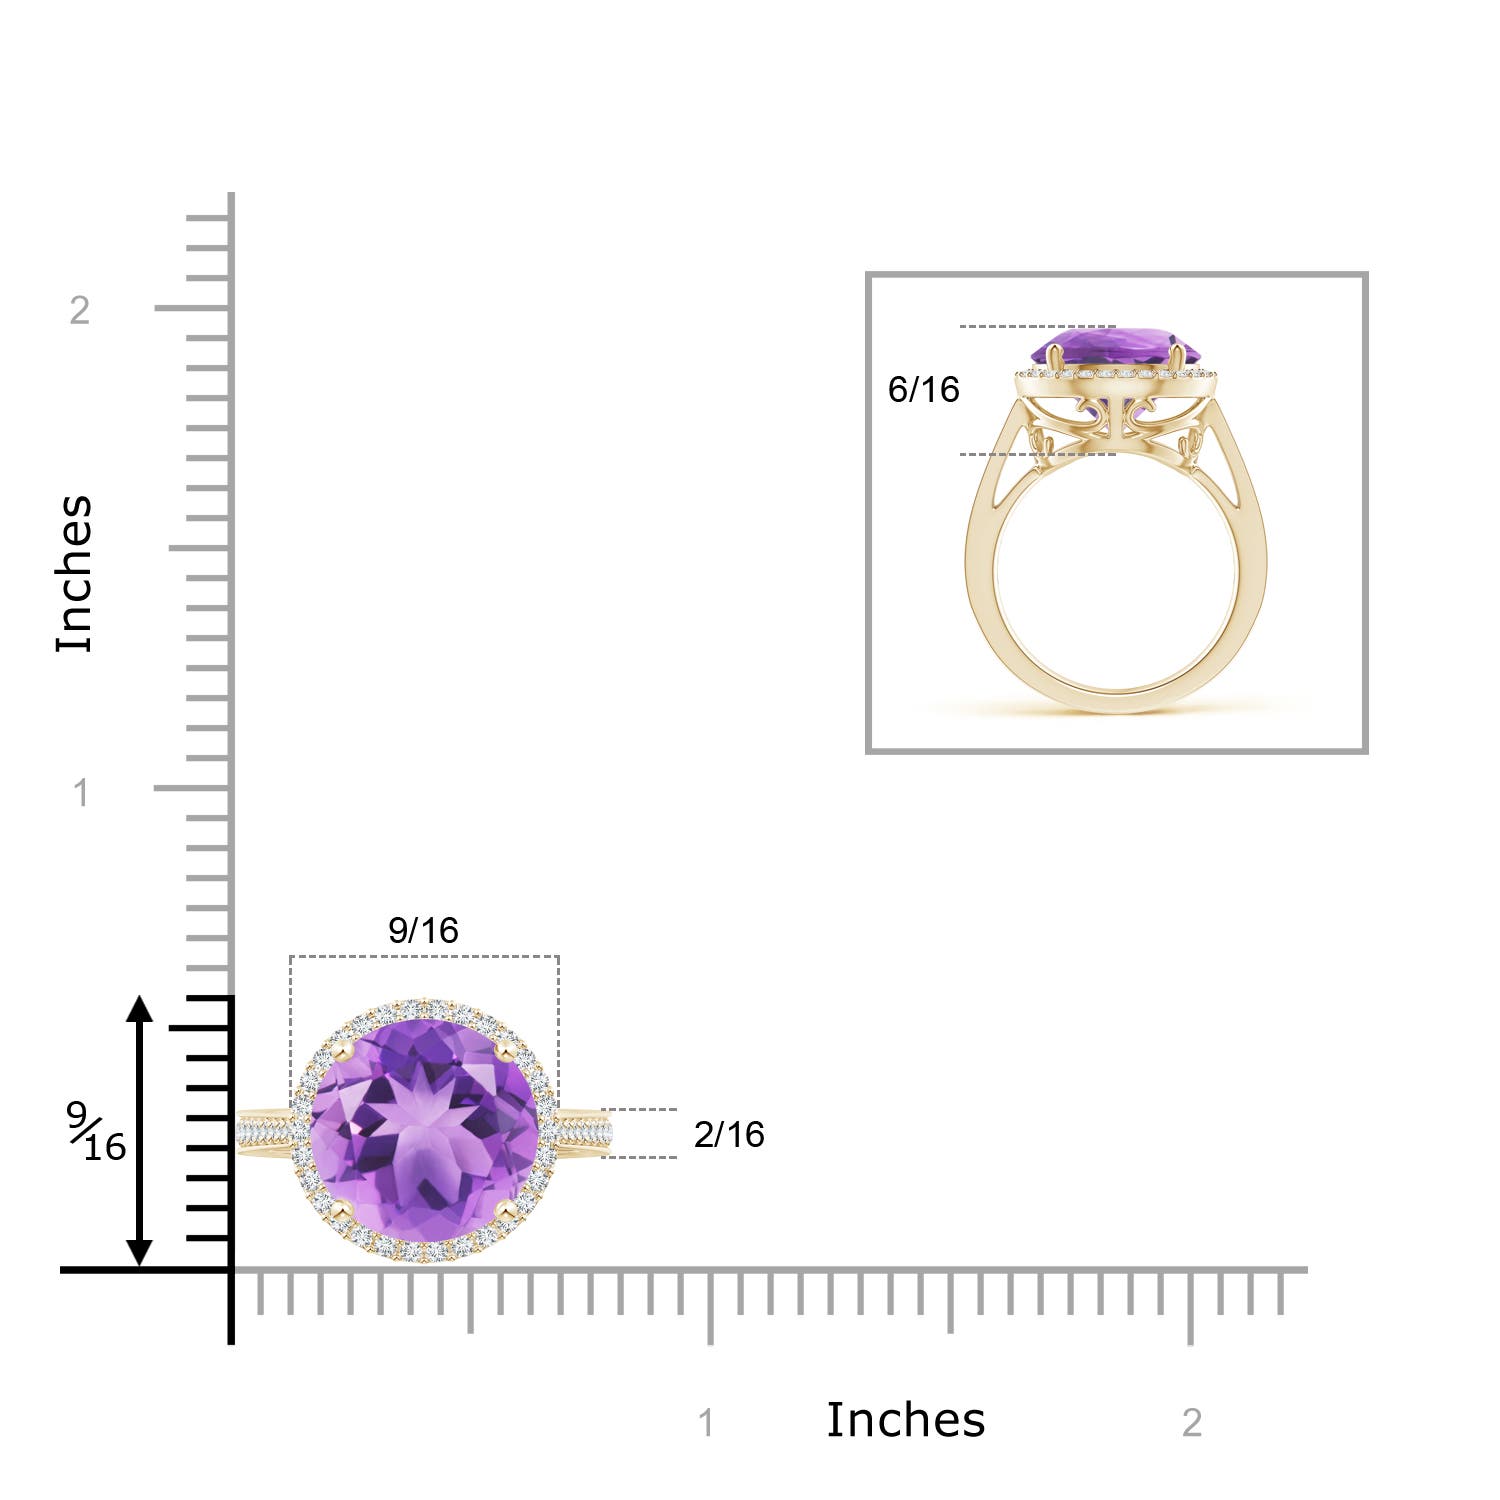 A - Amethyst / 5.94 CT / 14 KT Yellow Gold